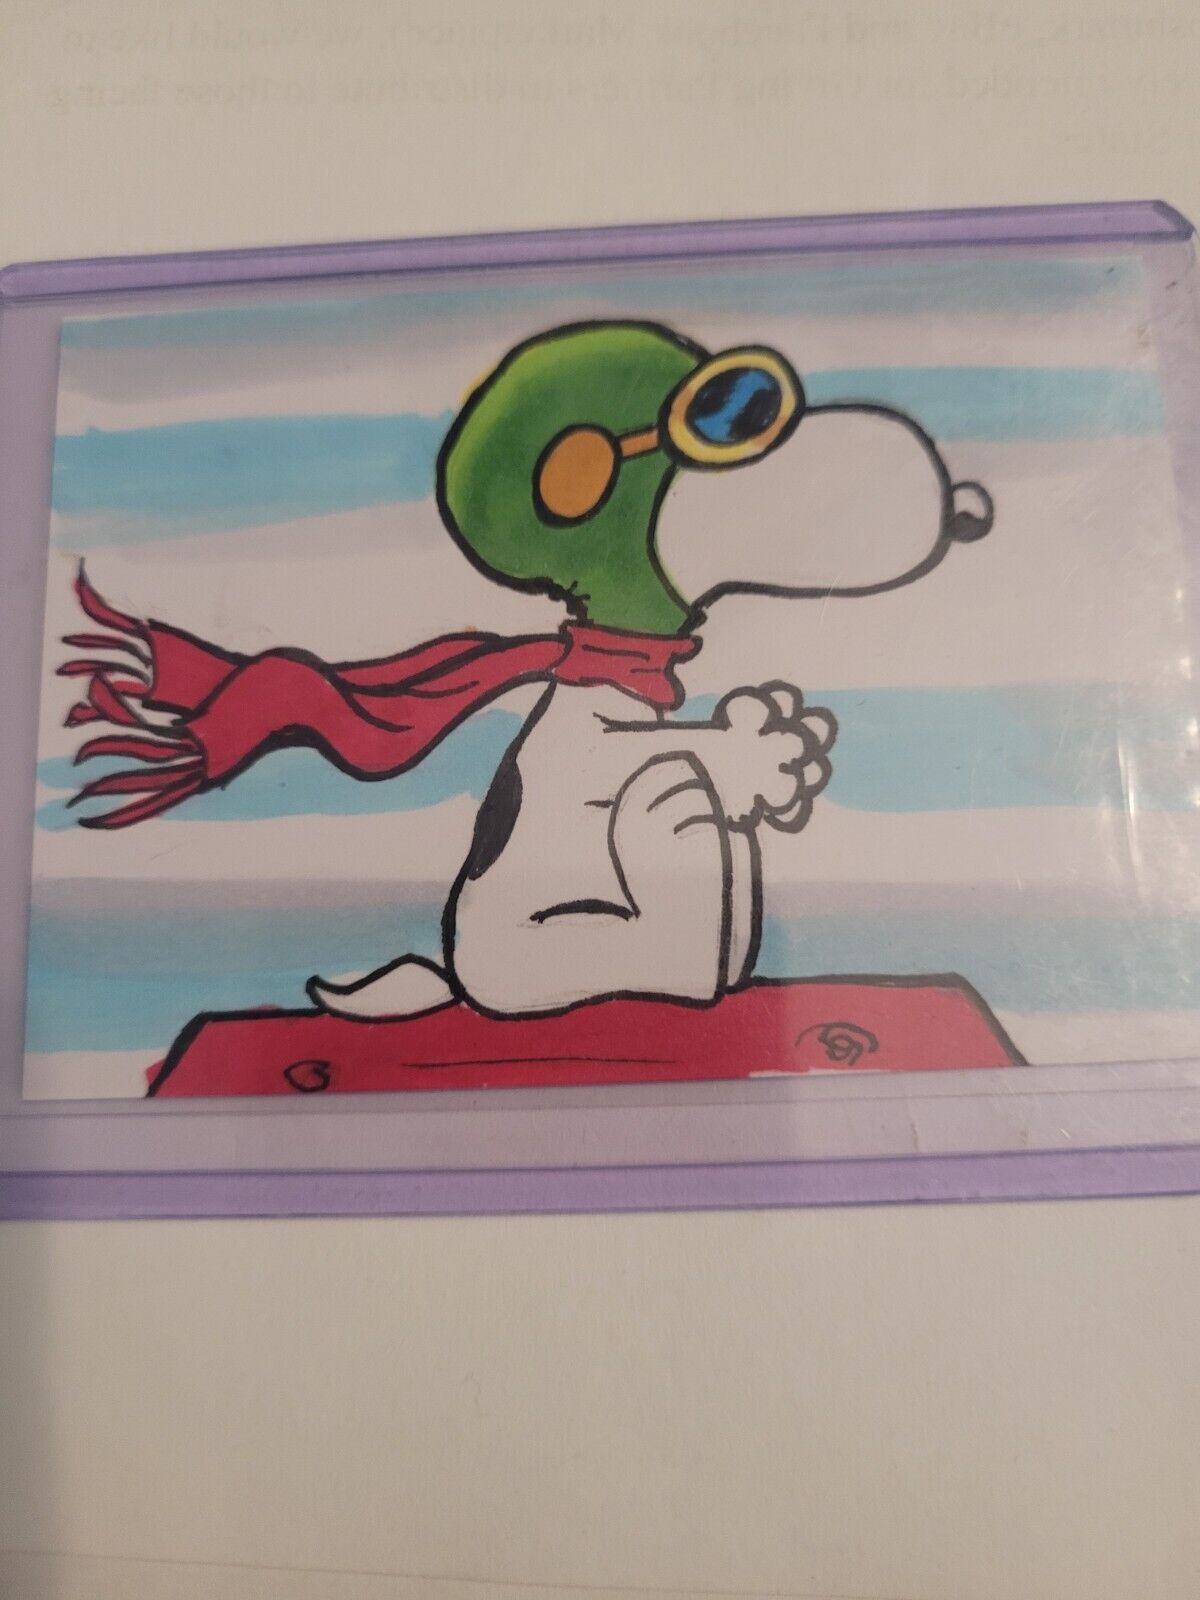 Charlie Brown Snoopy Flying Ace Peanuts ORIGINAL SKETCH CARD MATTHEW PARMENTER